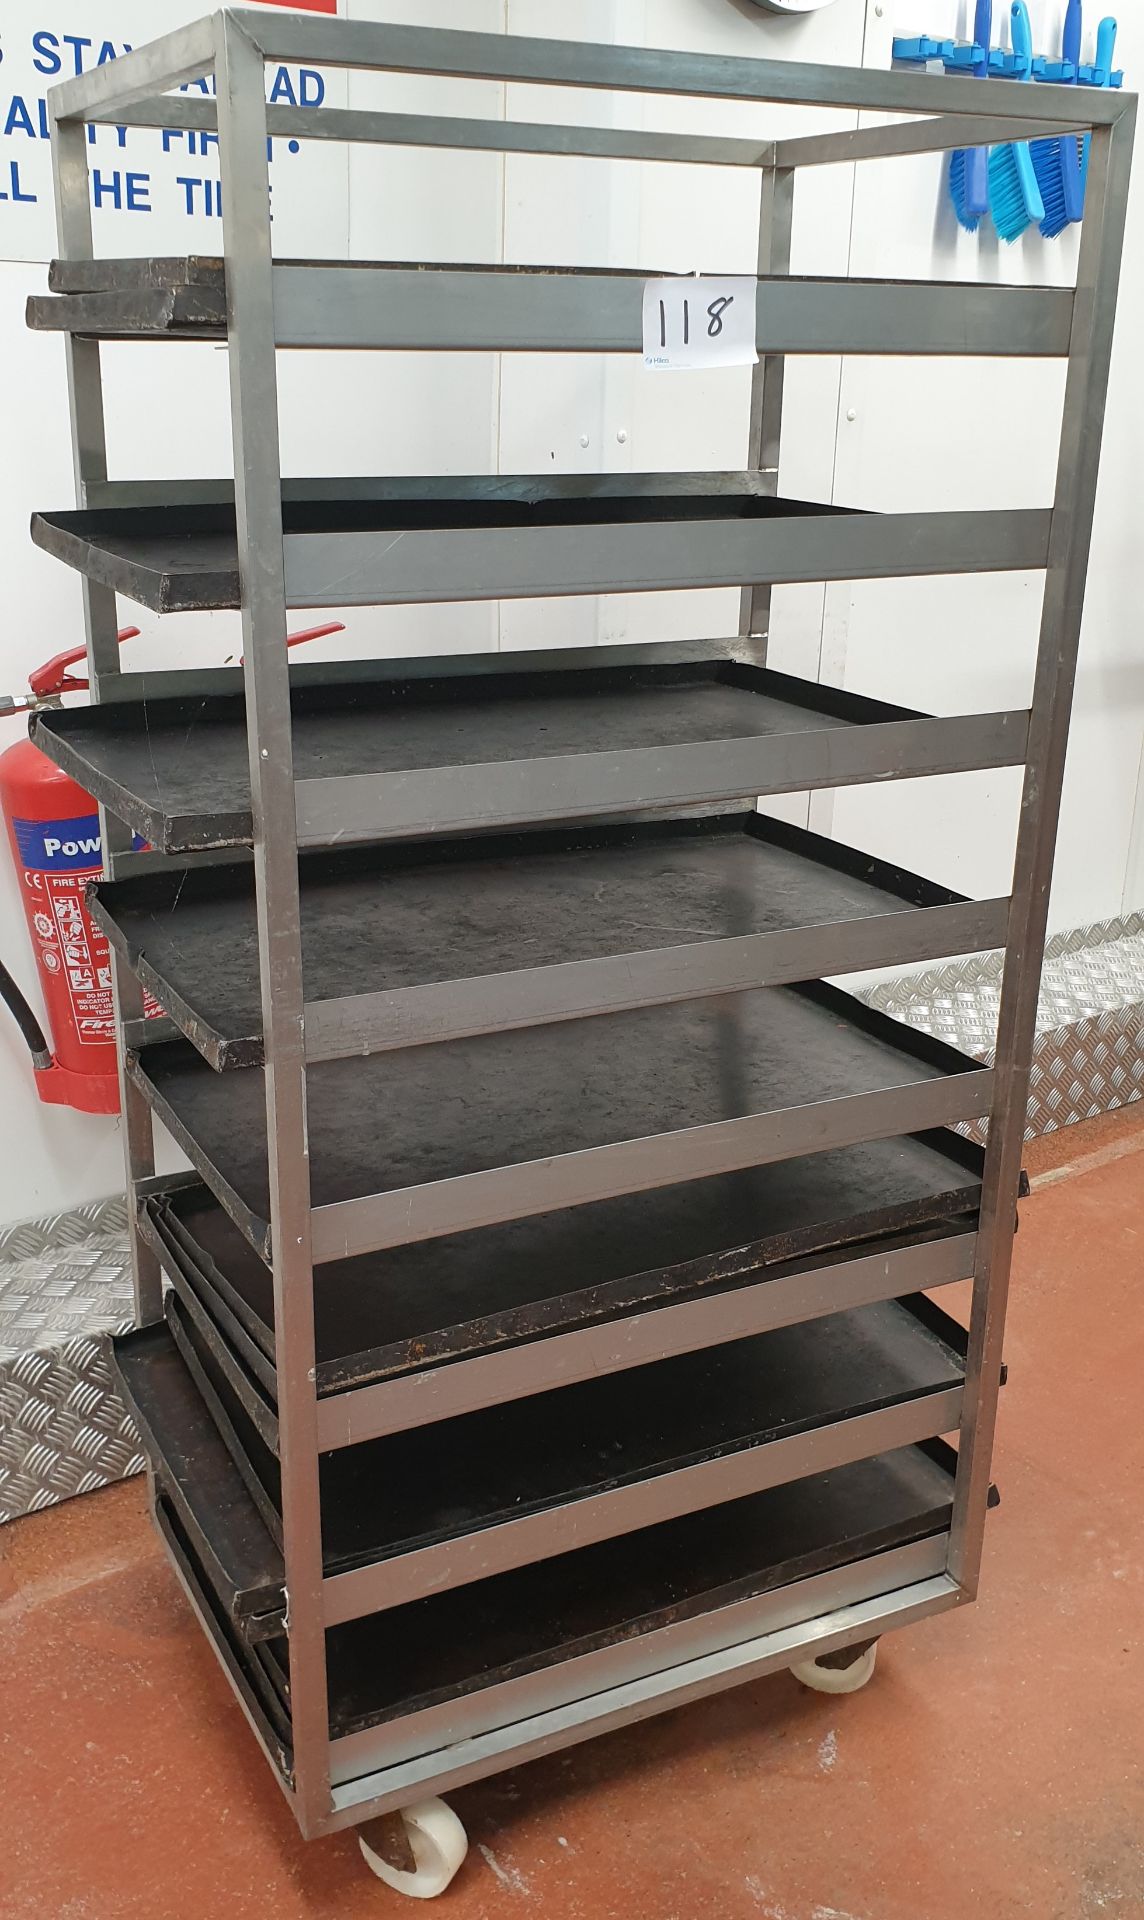 8 Tier Stainless Steel Mobile Tray Racking Unit complete with Black Trays, 0.73m(l) x 0.51m(w) x 1.5